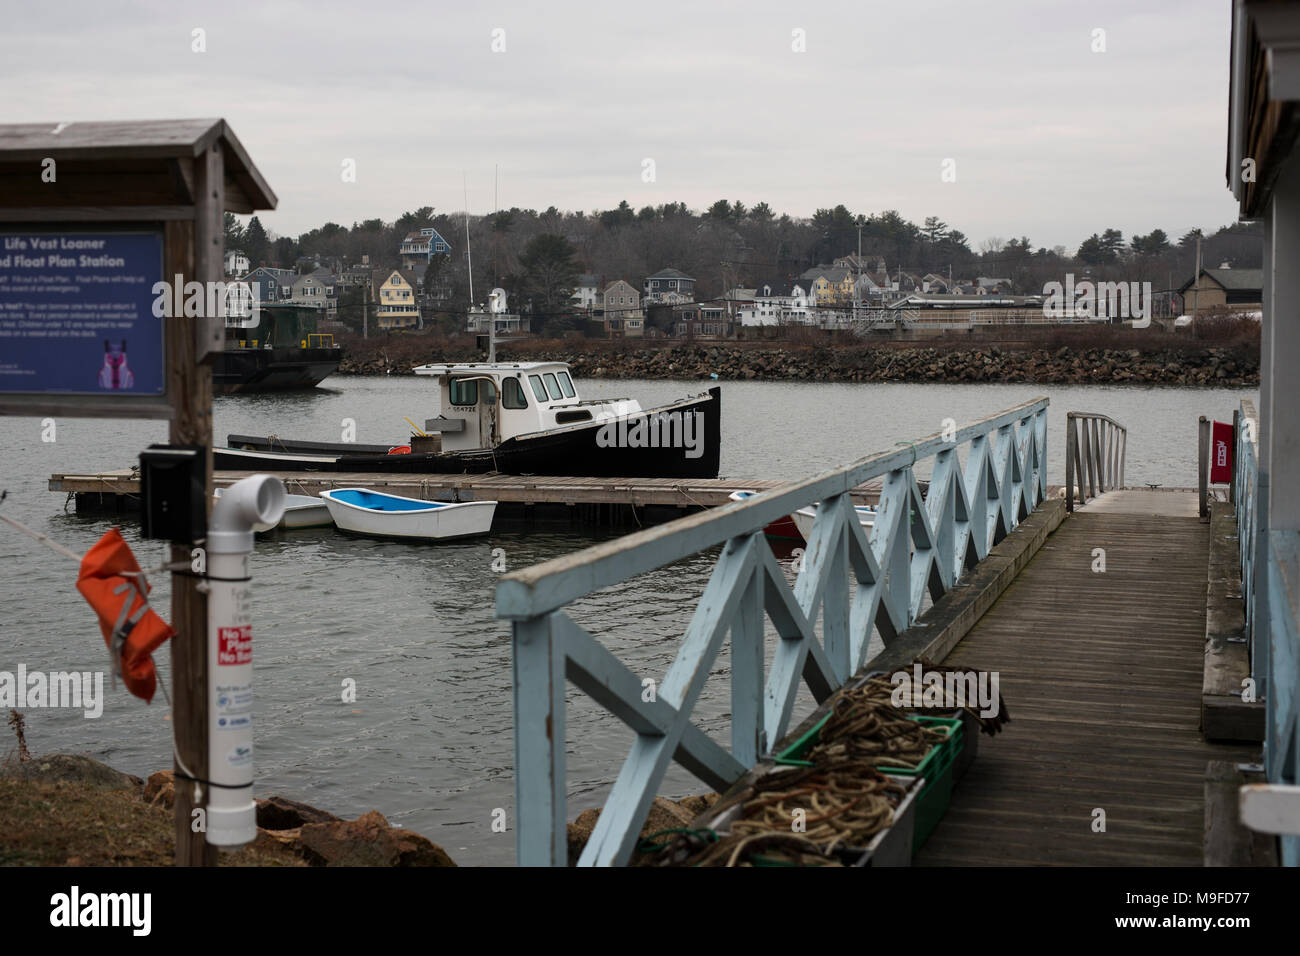 A boat in the dock in the harbor of Manchester-by-the-Sea, Massachusetts. Stock Photo